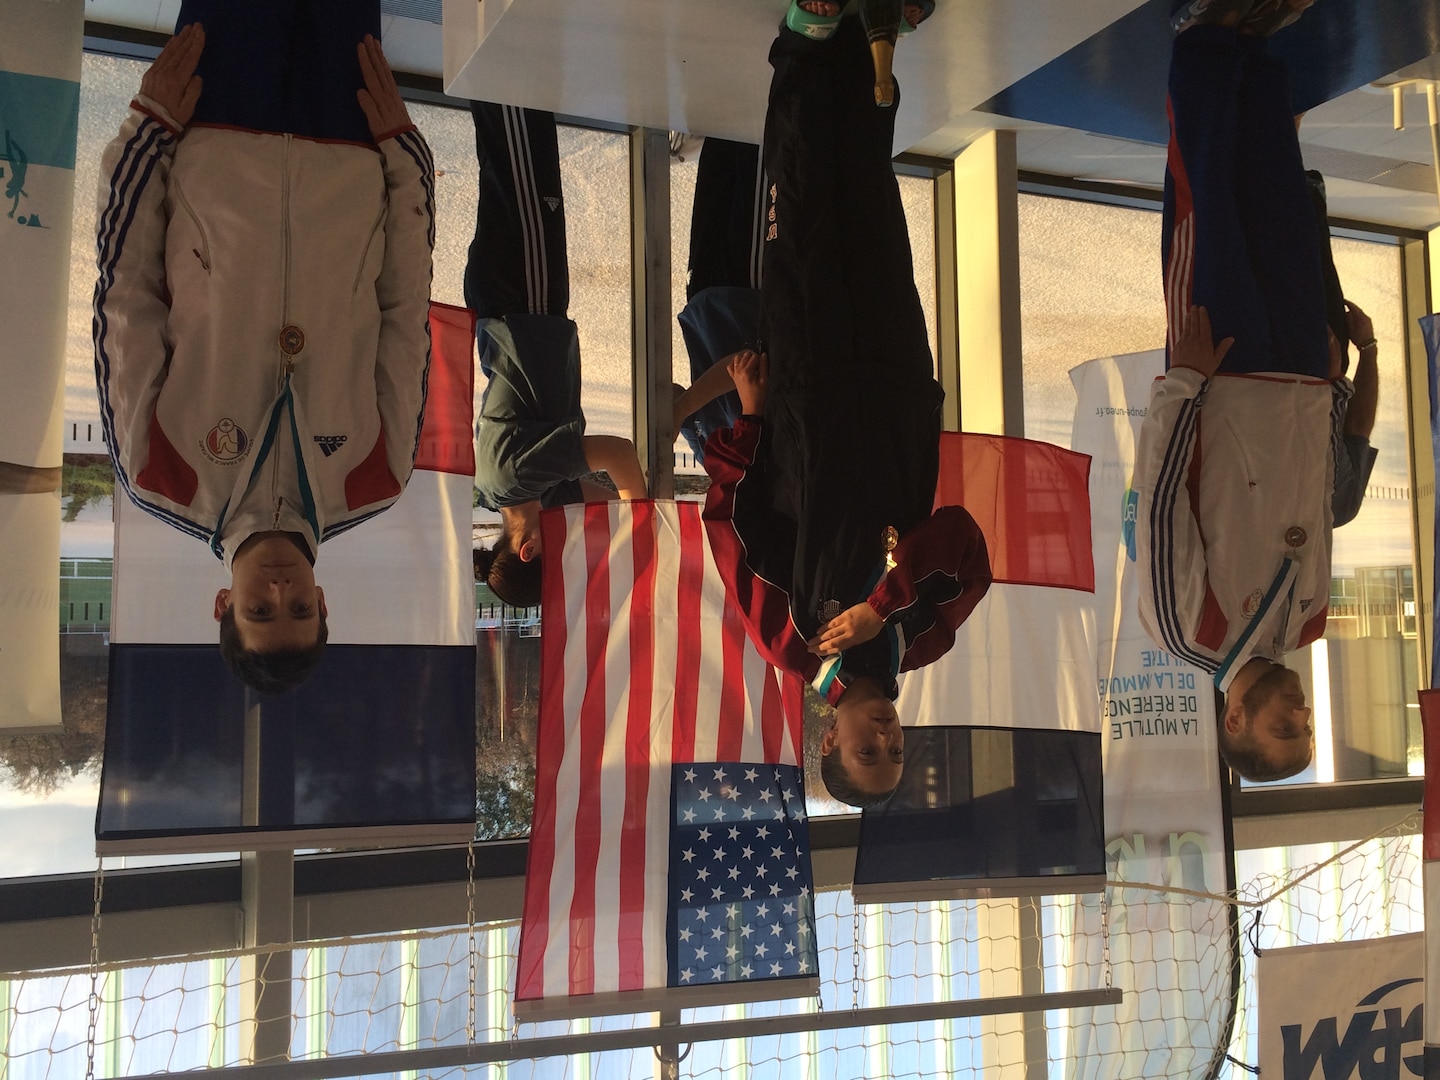 Army Sgt. Elizabeth Wasil (Ft. Carson, Colo.) stands on top of the podium as the Stars and Stripes are raised after being awarded the gold medal in the 100m breaststroke in the CISM ISC para-swimming classification during the 2015 Conseil International du Sport Militaire (CISM) Swimming & Para-Swimming Open.